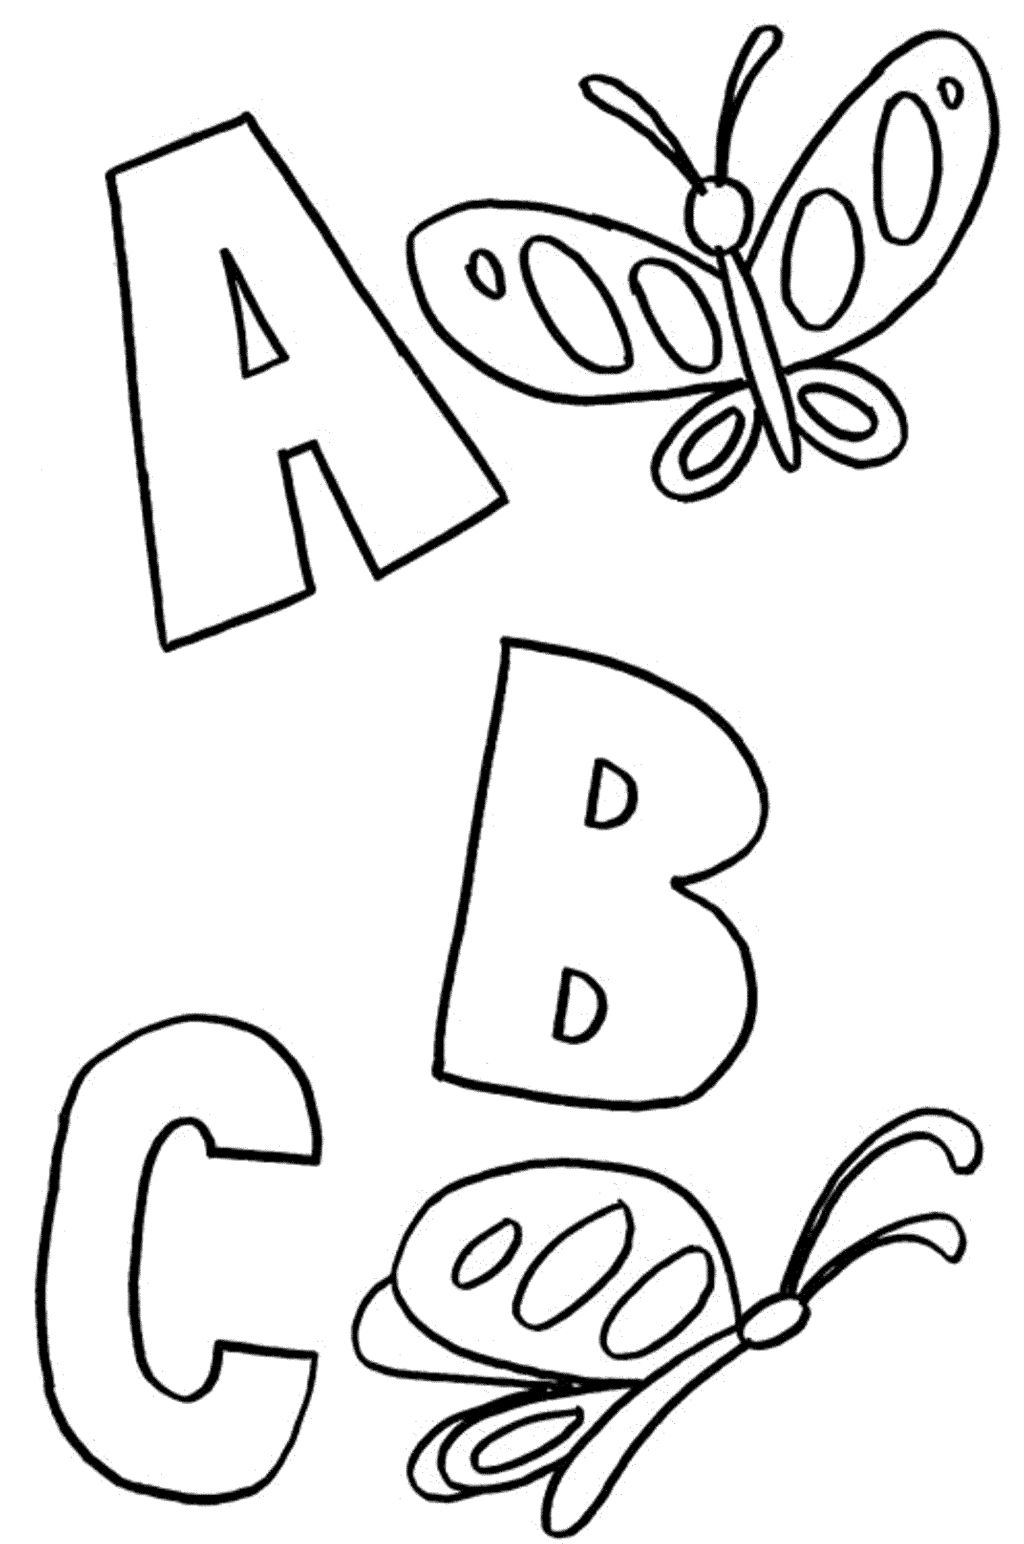 Free Printable Abc Coloring Pages Tag: Astonishing Free Abc Coloring Pages. Abc  Coloring Book Printable.